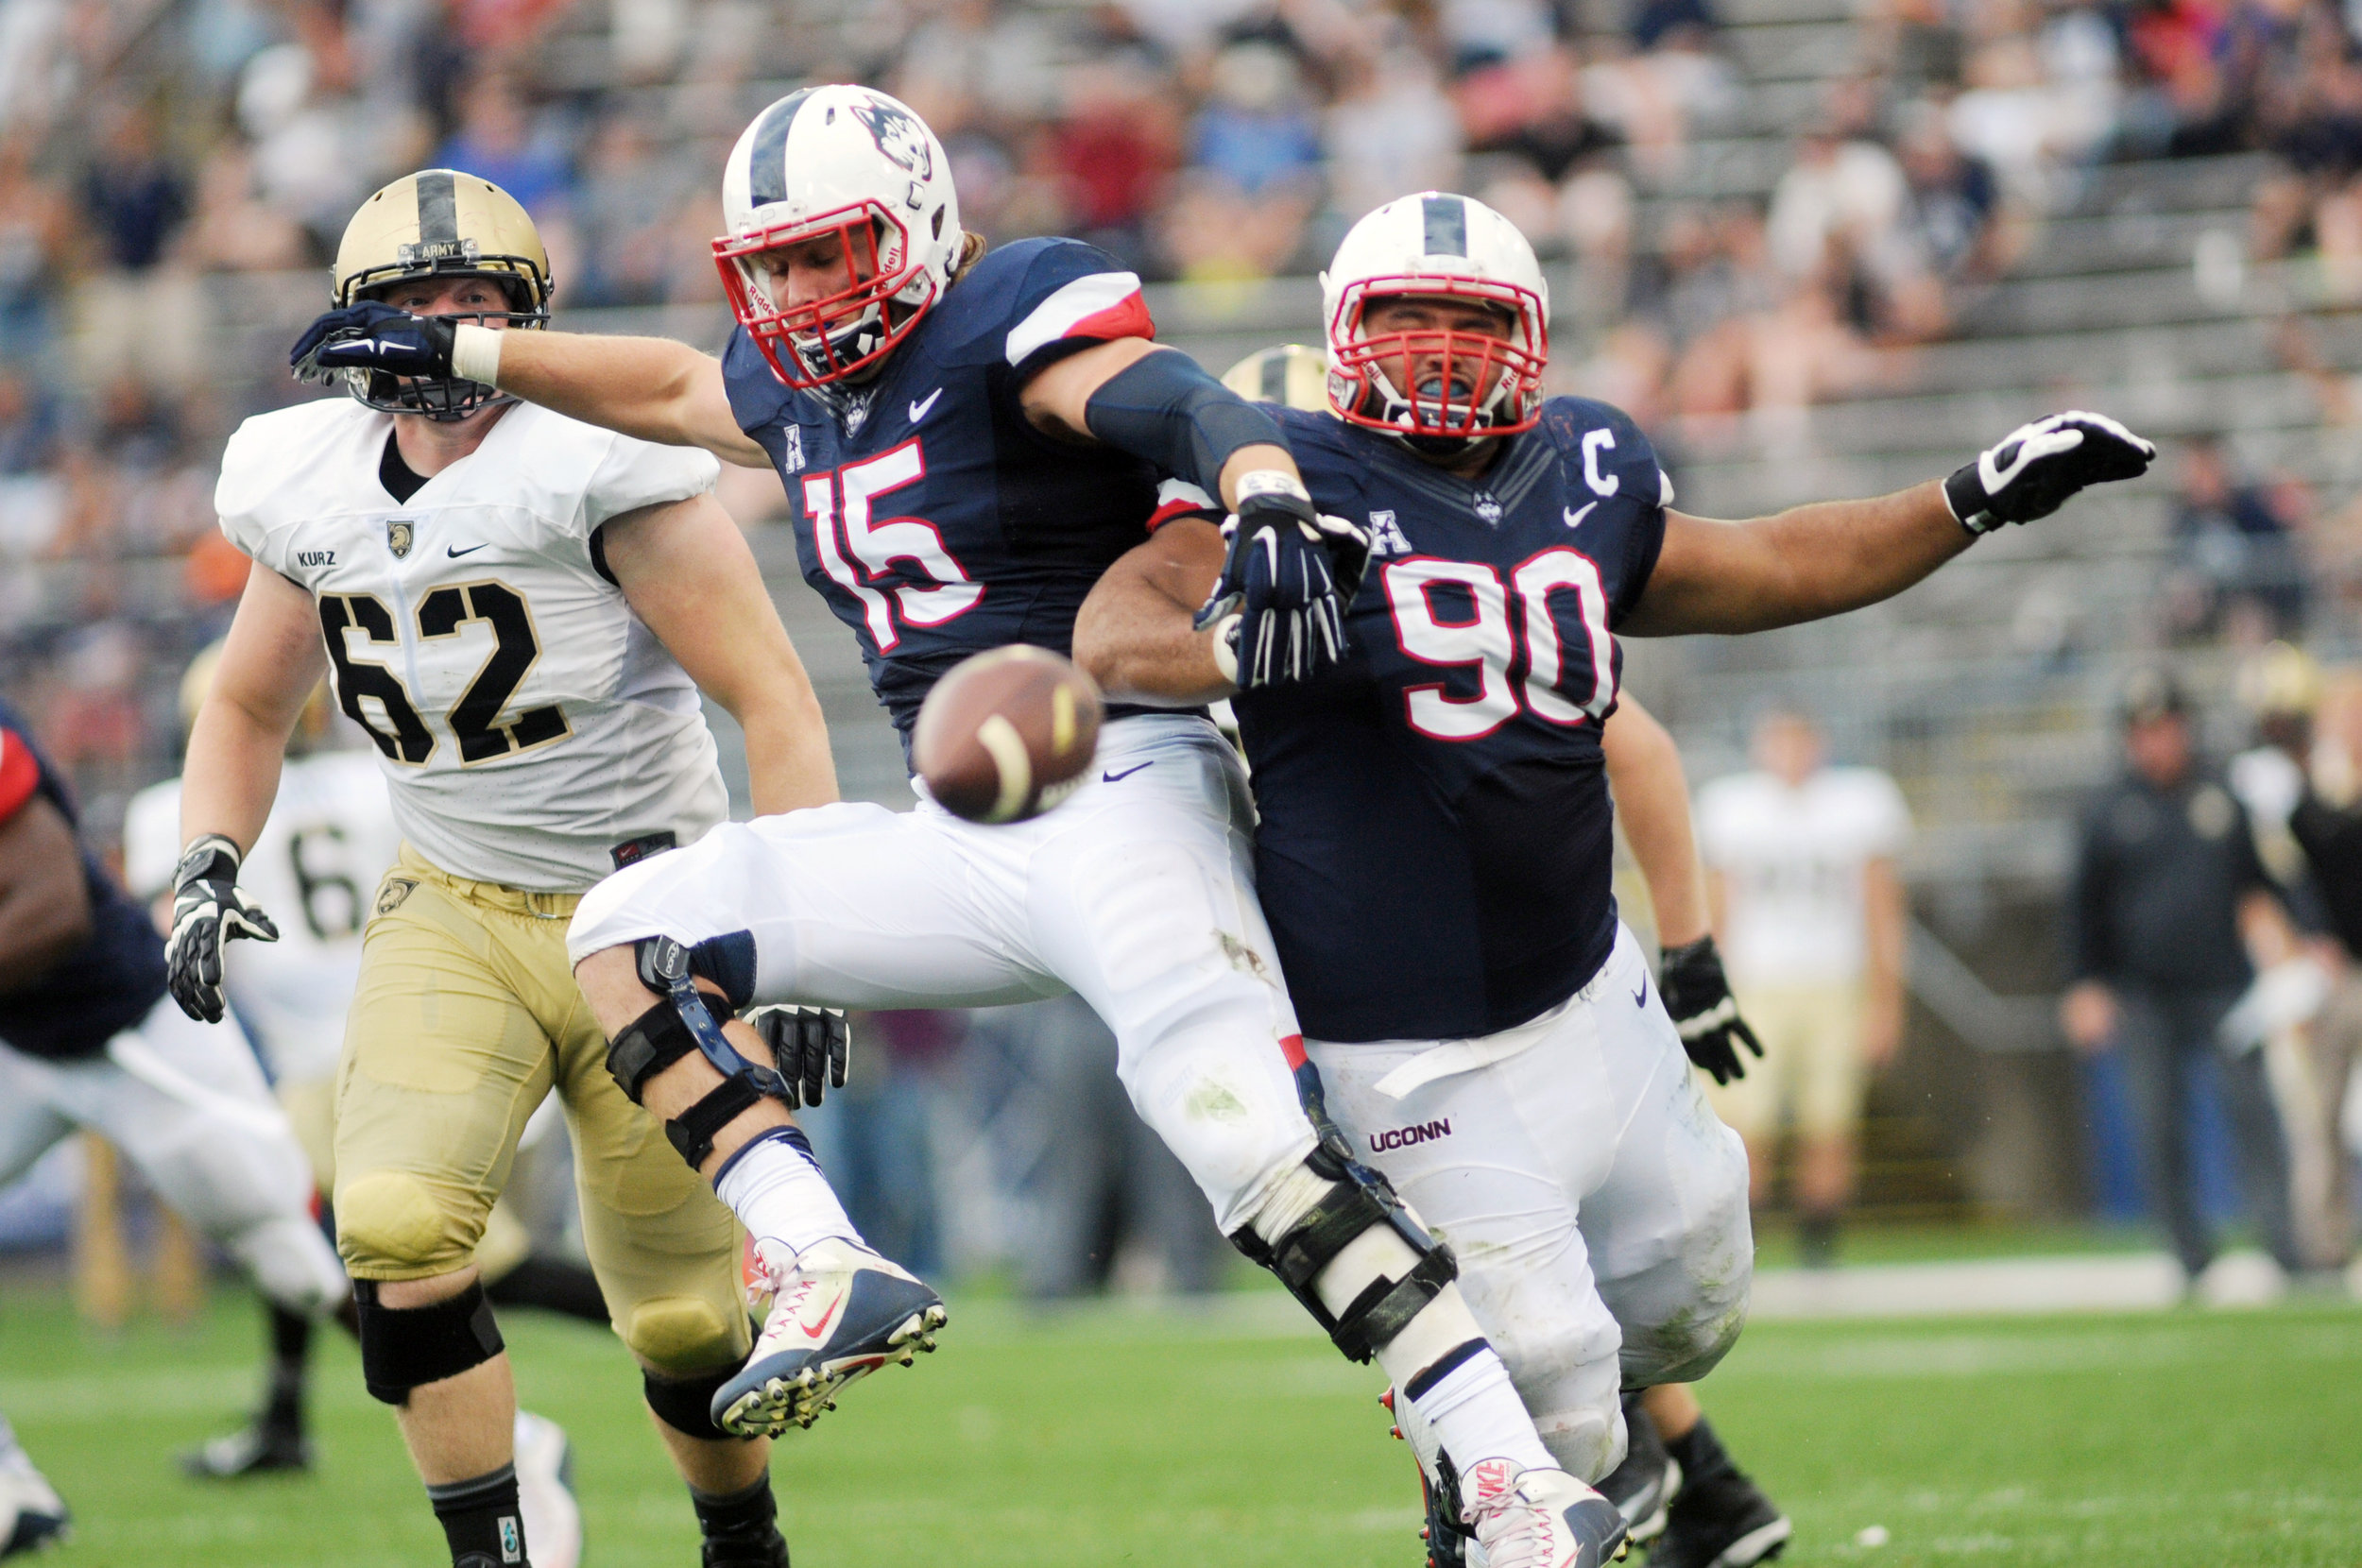  Linebacker Luke Carrezola (15) and defensive lineman Julian Campenni (90) clash for the ball at Pratt &amp; Whitney's Rentschler Field in Hartford, Conn. against Army on Sept. 12, 2015. 